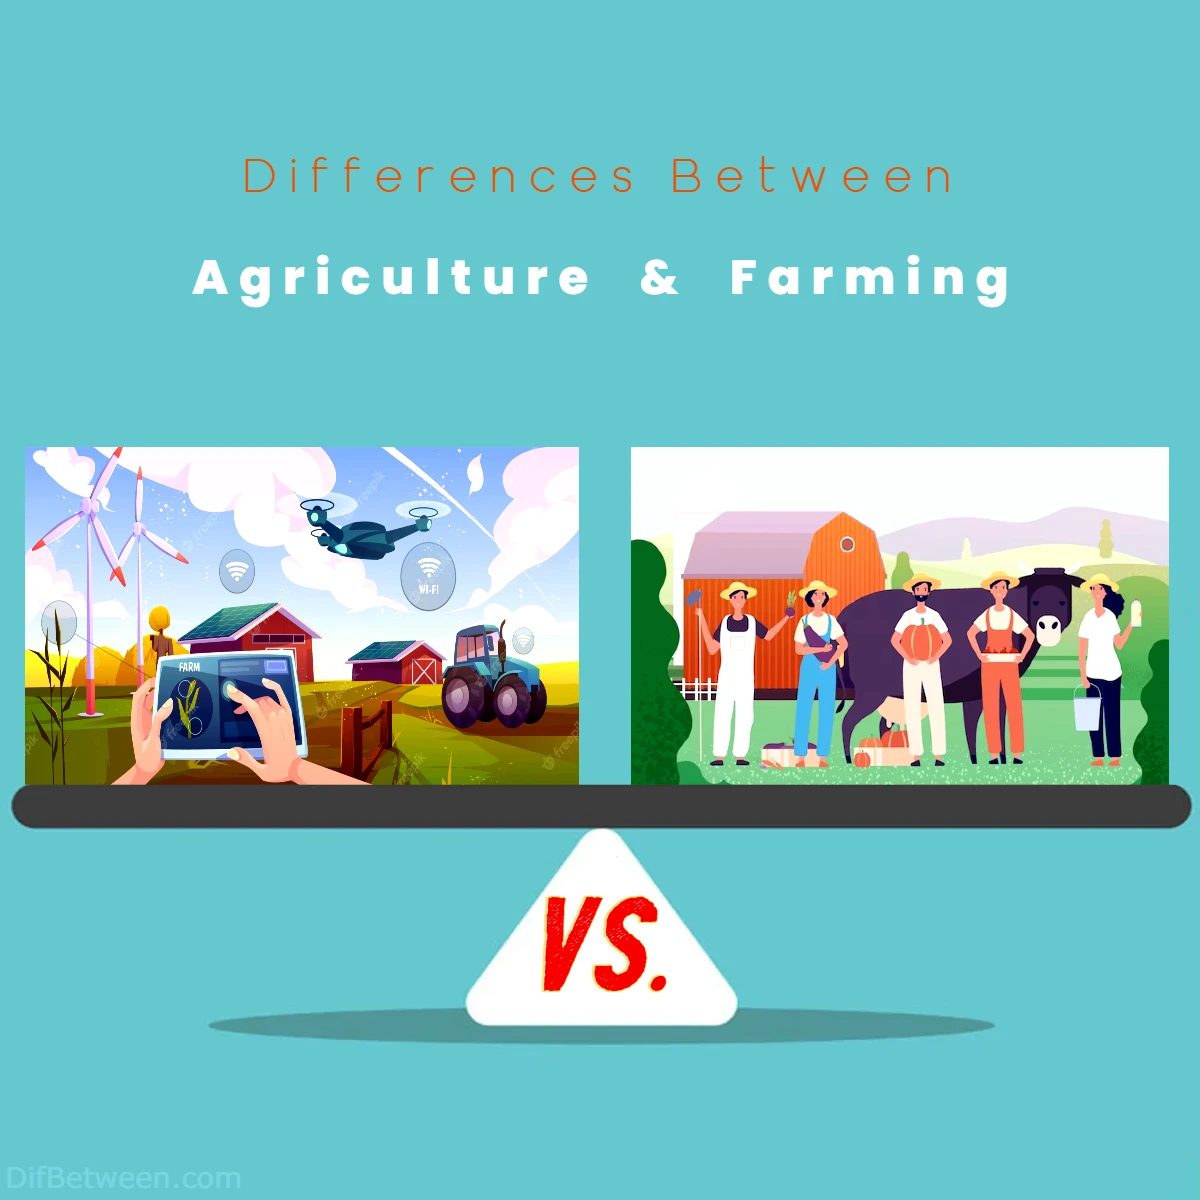 Differences Between Agriculture vs Farming